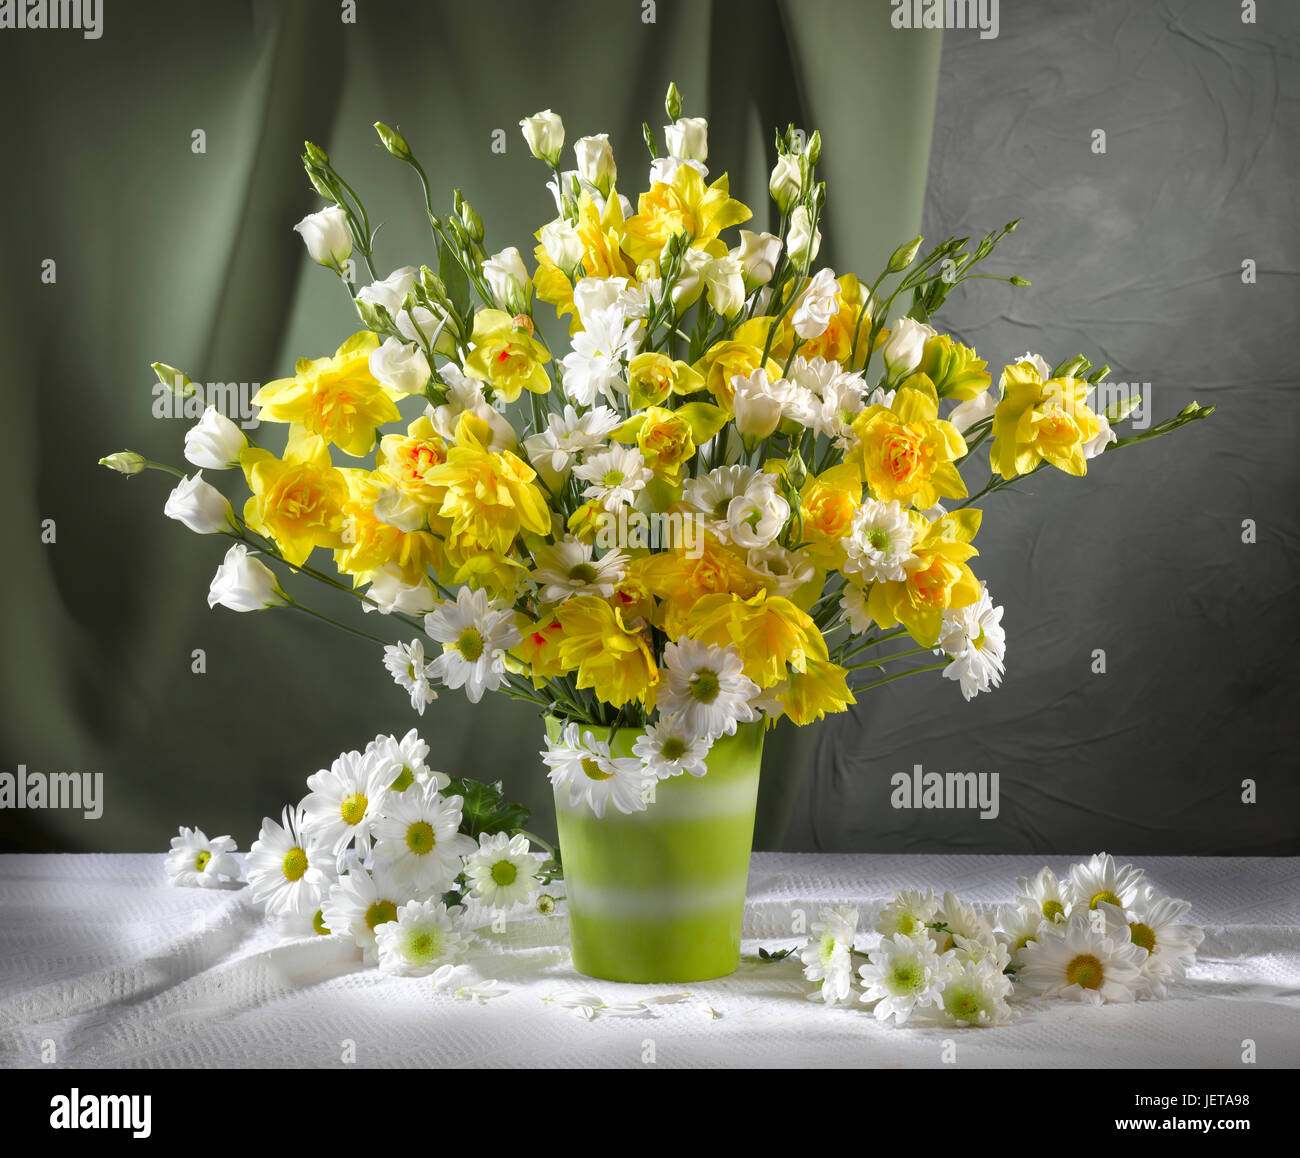 Bouquet of flowers with daffodils. Stock Photo